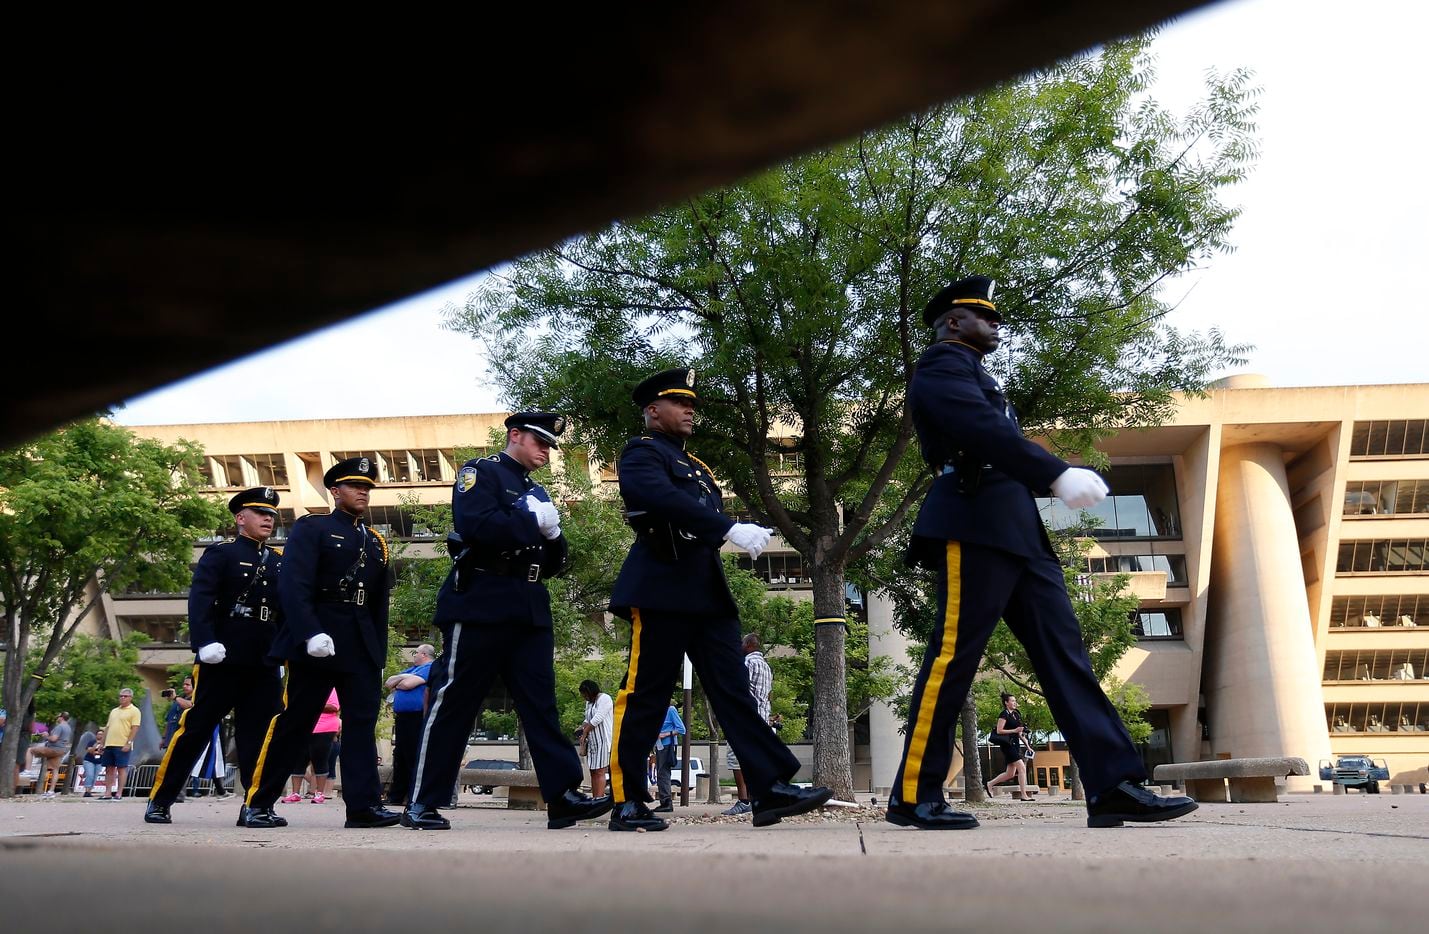 A member of the DART (Dallas Area Rapid Transit) Police Honor Guard (third from left)...